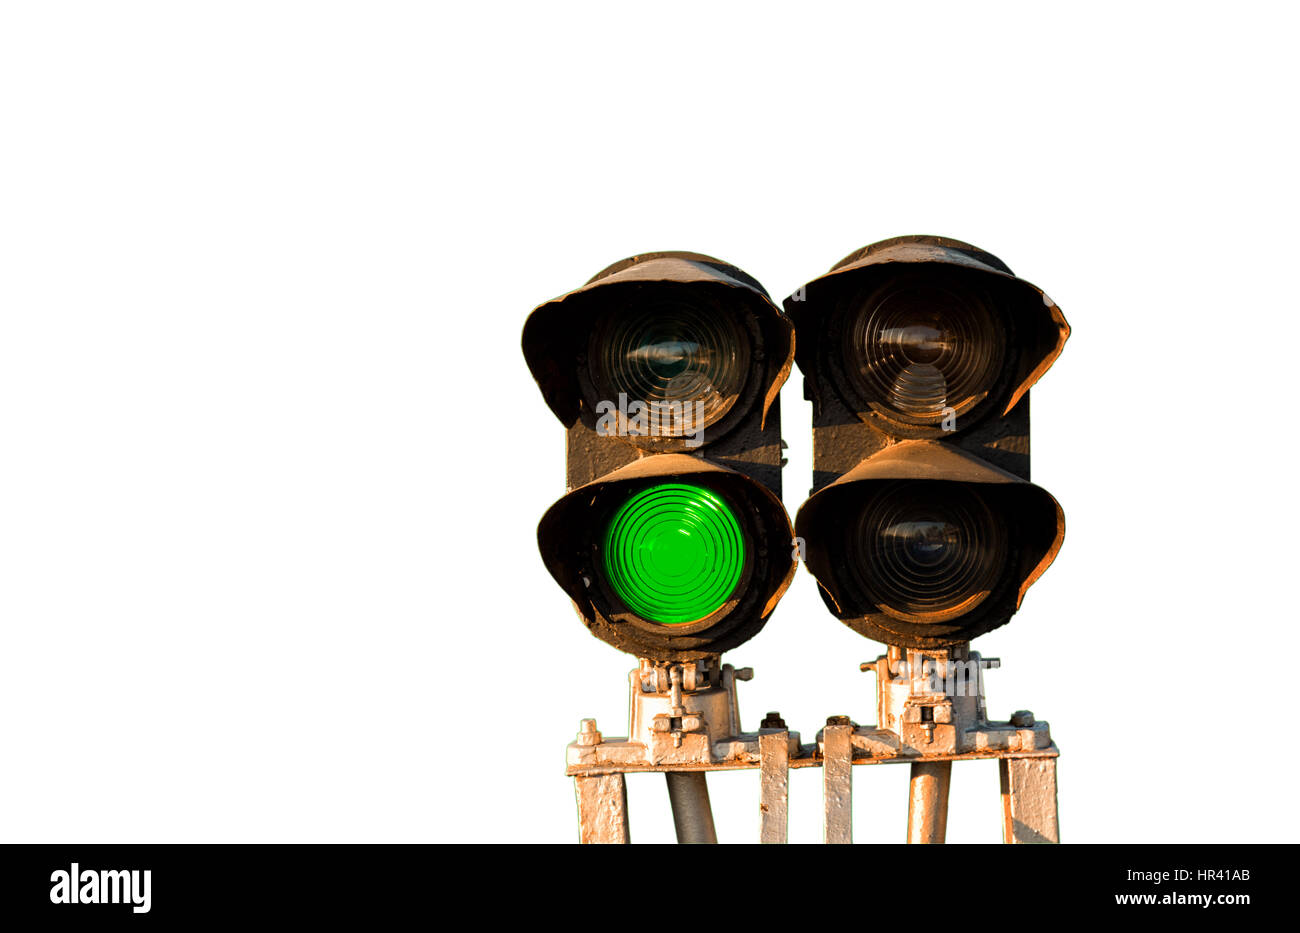 Traffic light shows green signal on railway isolated on white background Stock Photo